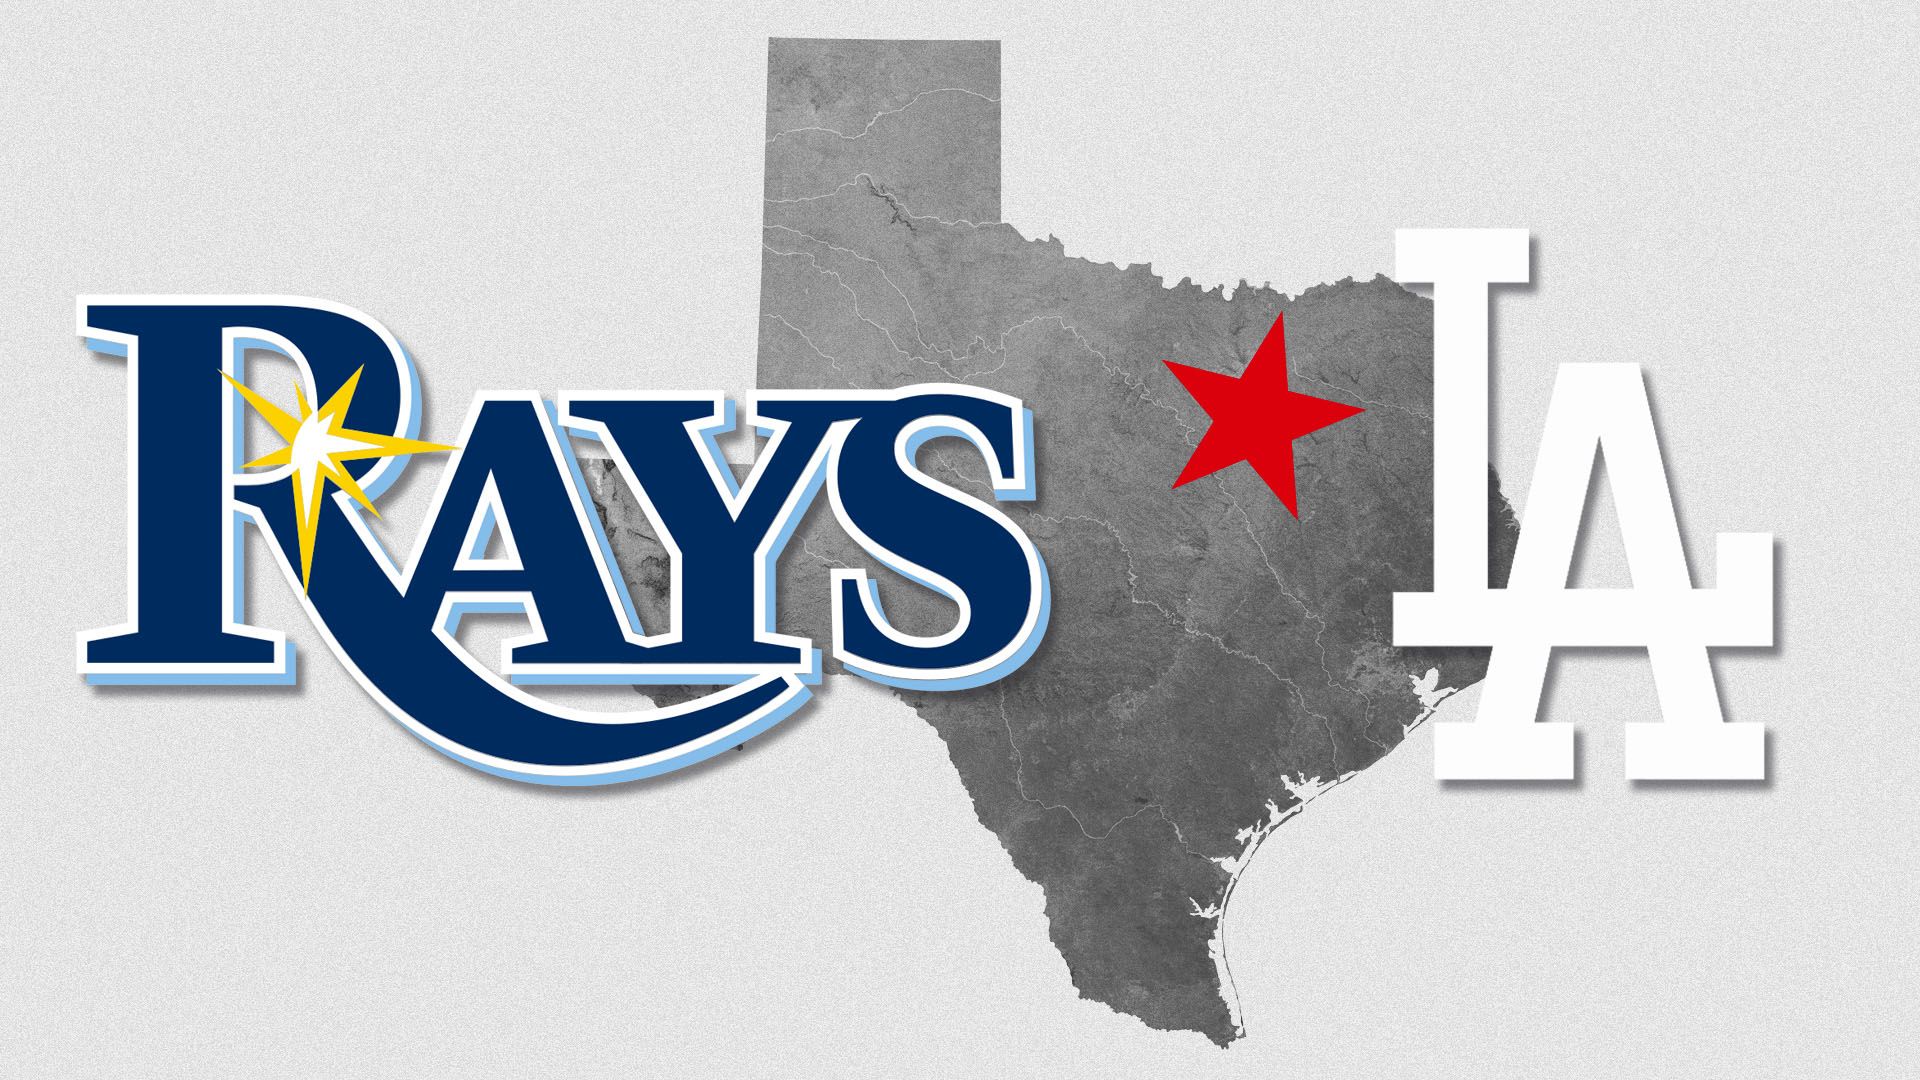 Rays and Dodgers logo over state of Texas